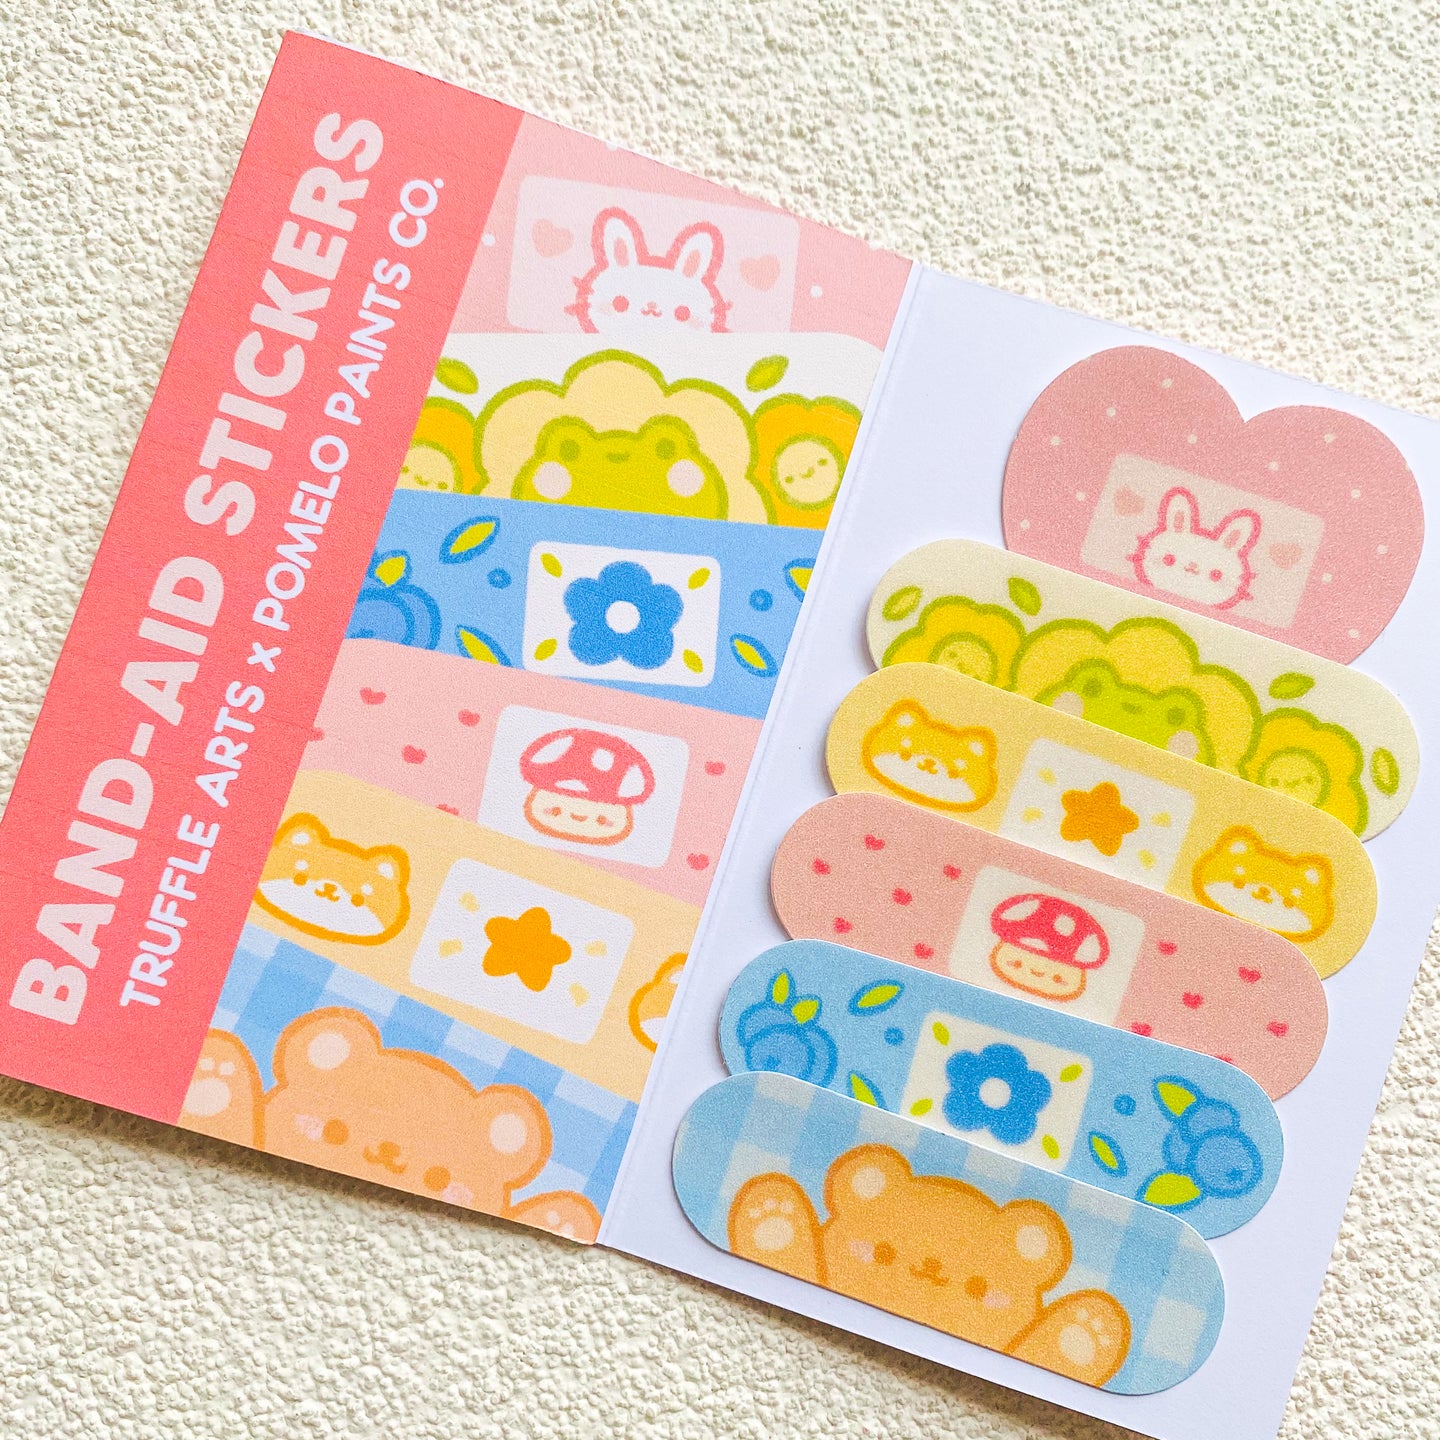 Pomelo Paints Co. Collab Band-Aid Sticker Pack